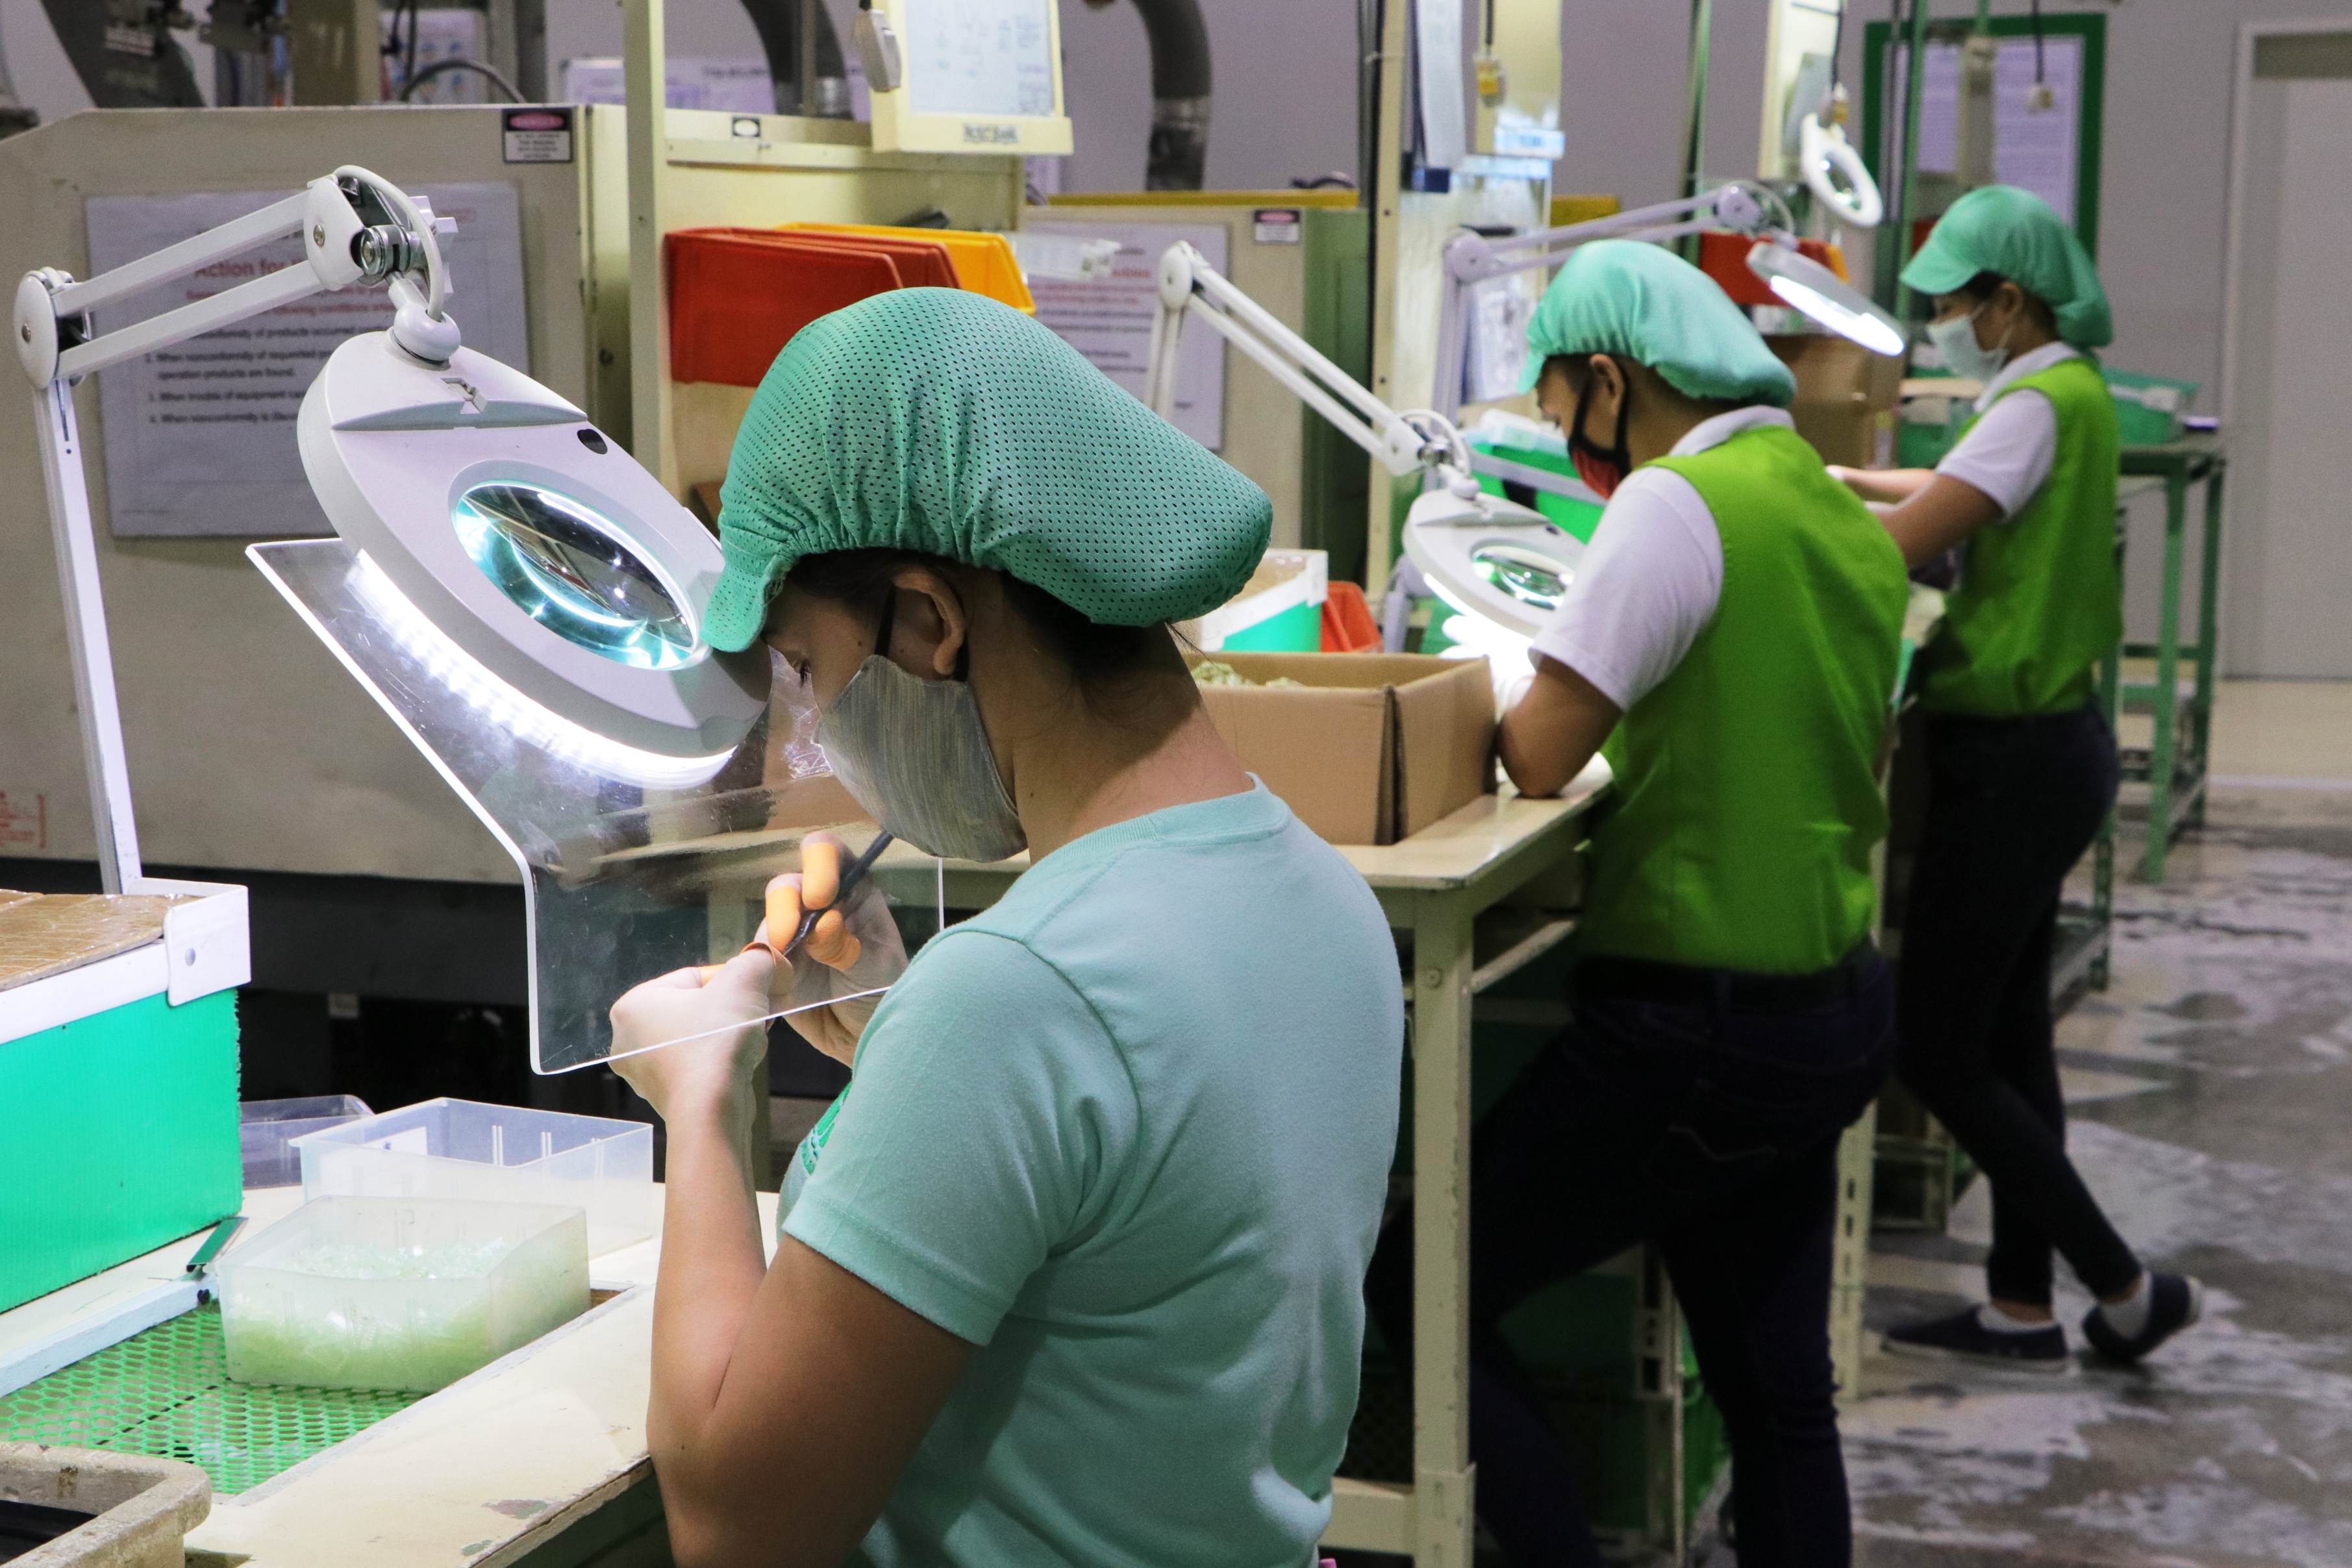 Workers at Sanyo Denki Philippines, Inc. assemble cooling fans used for ventilatorsâ€”one of Subicâ€™s top export products during the Covid-19 pandemic